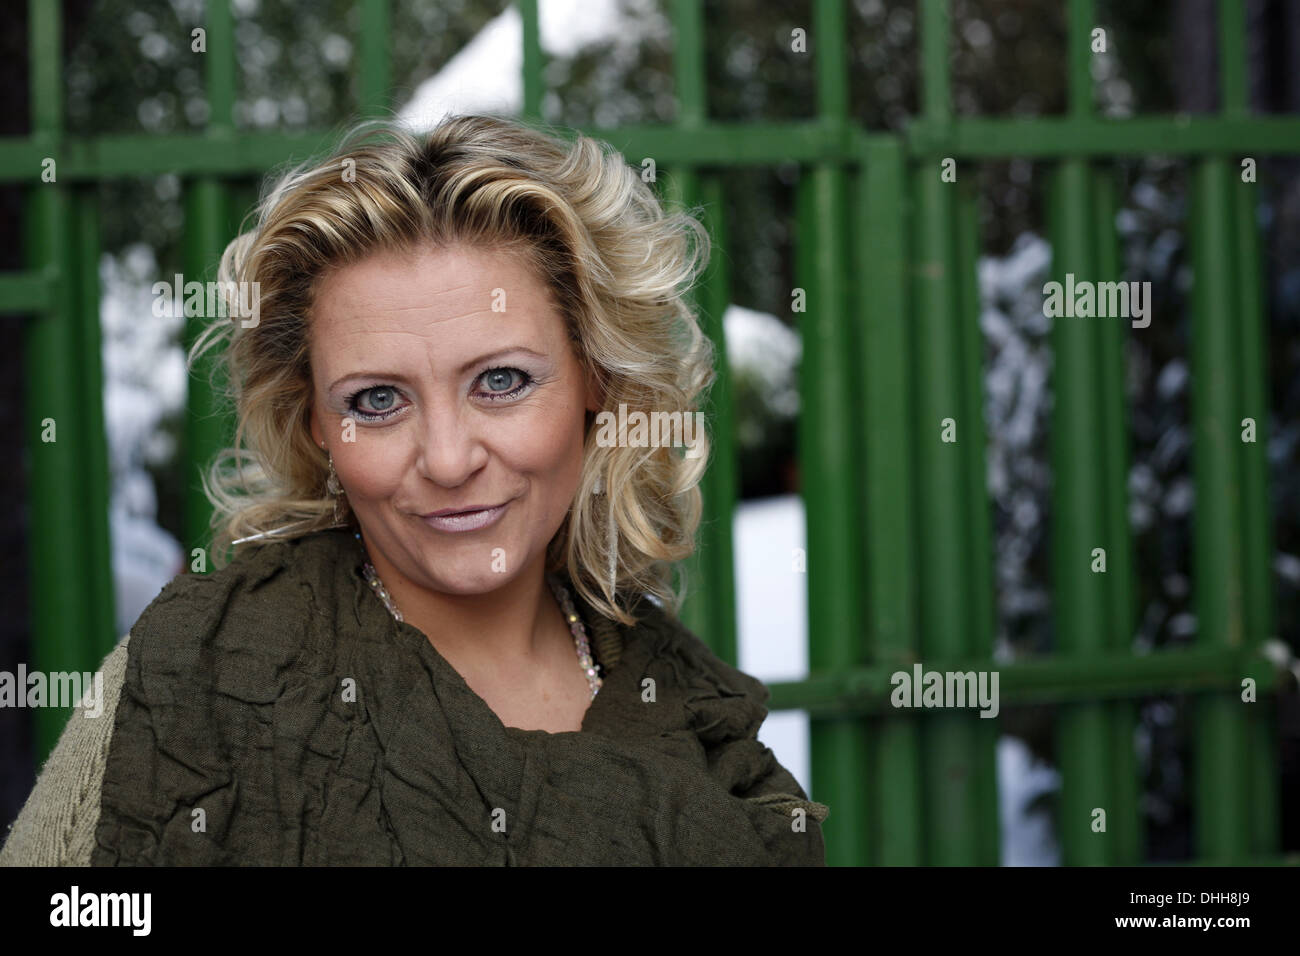 blond woman in a green coat Stock Photo